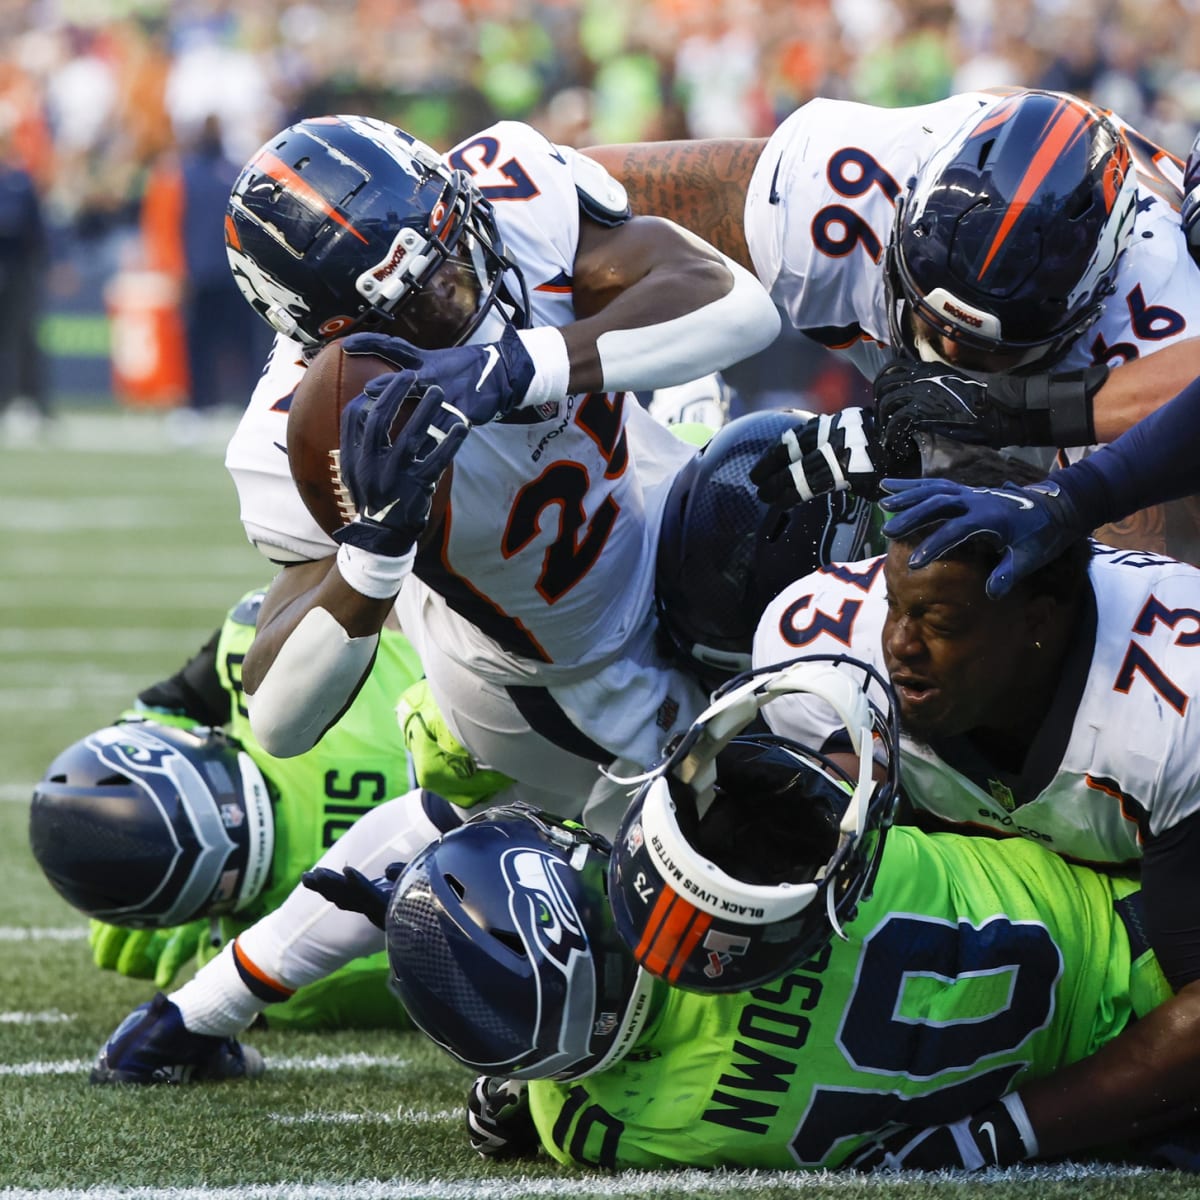 We're going to be unwavering': Broncos focused on rebounding after red-zone  turnovers, penalties lead to 17-16 loss to Seahawks